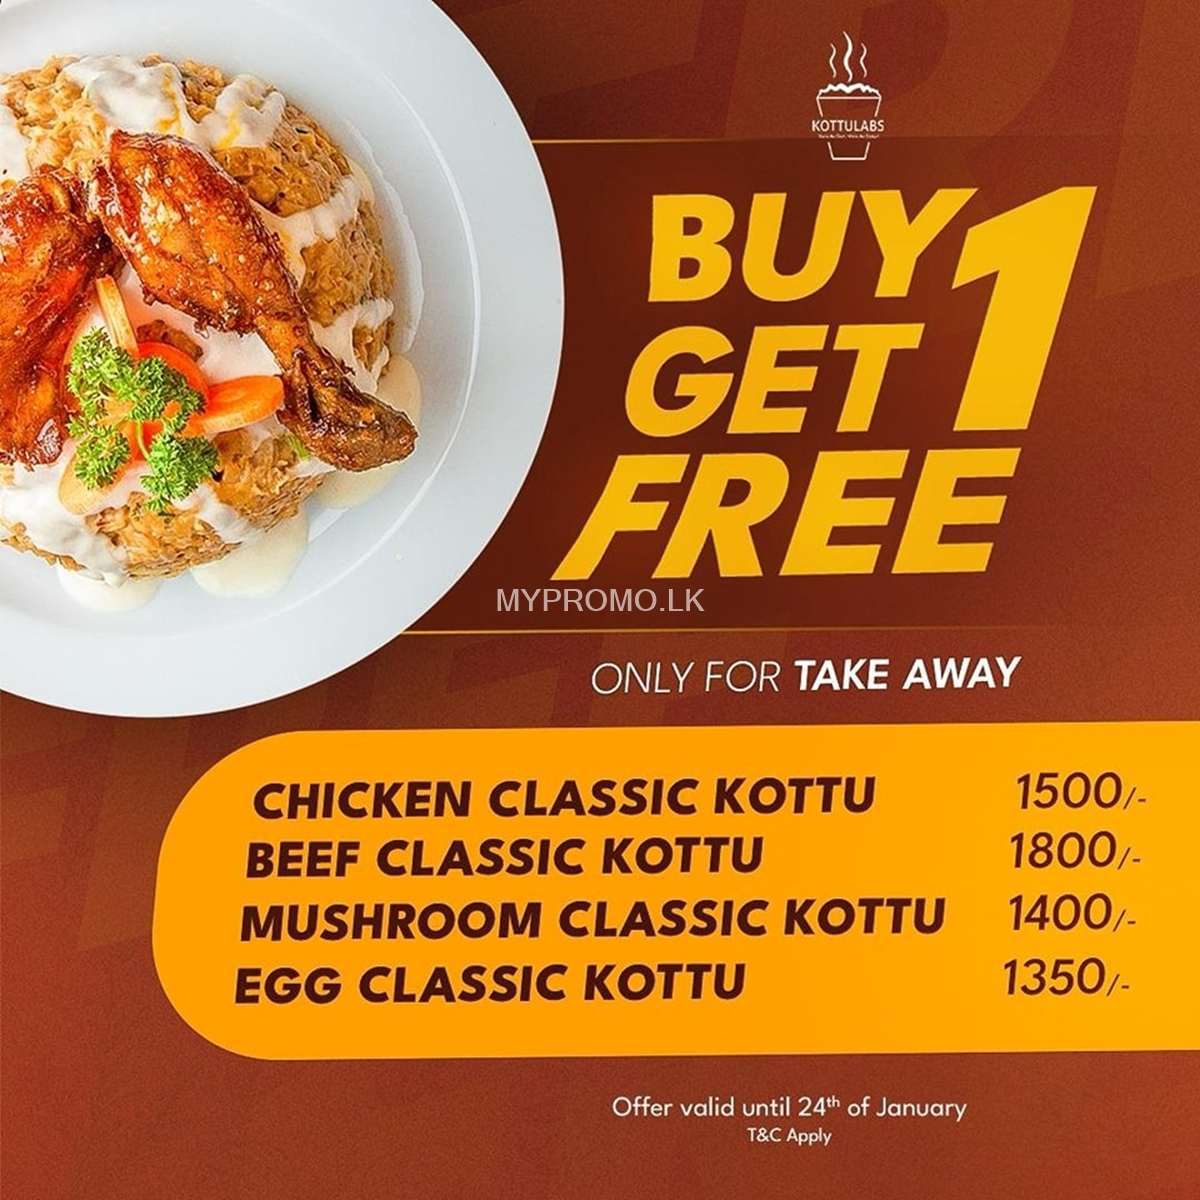 Buy 1 get 1 free with Kottulabs